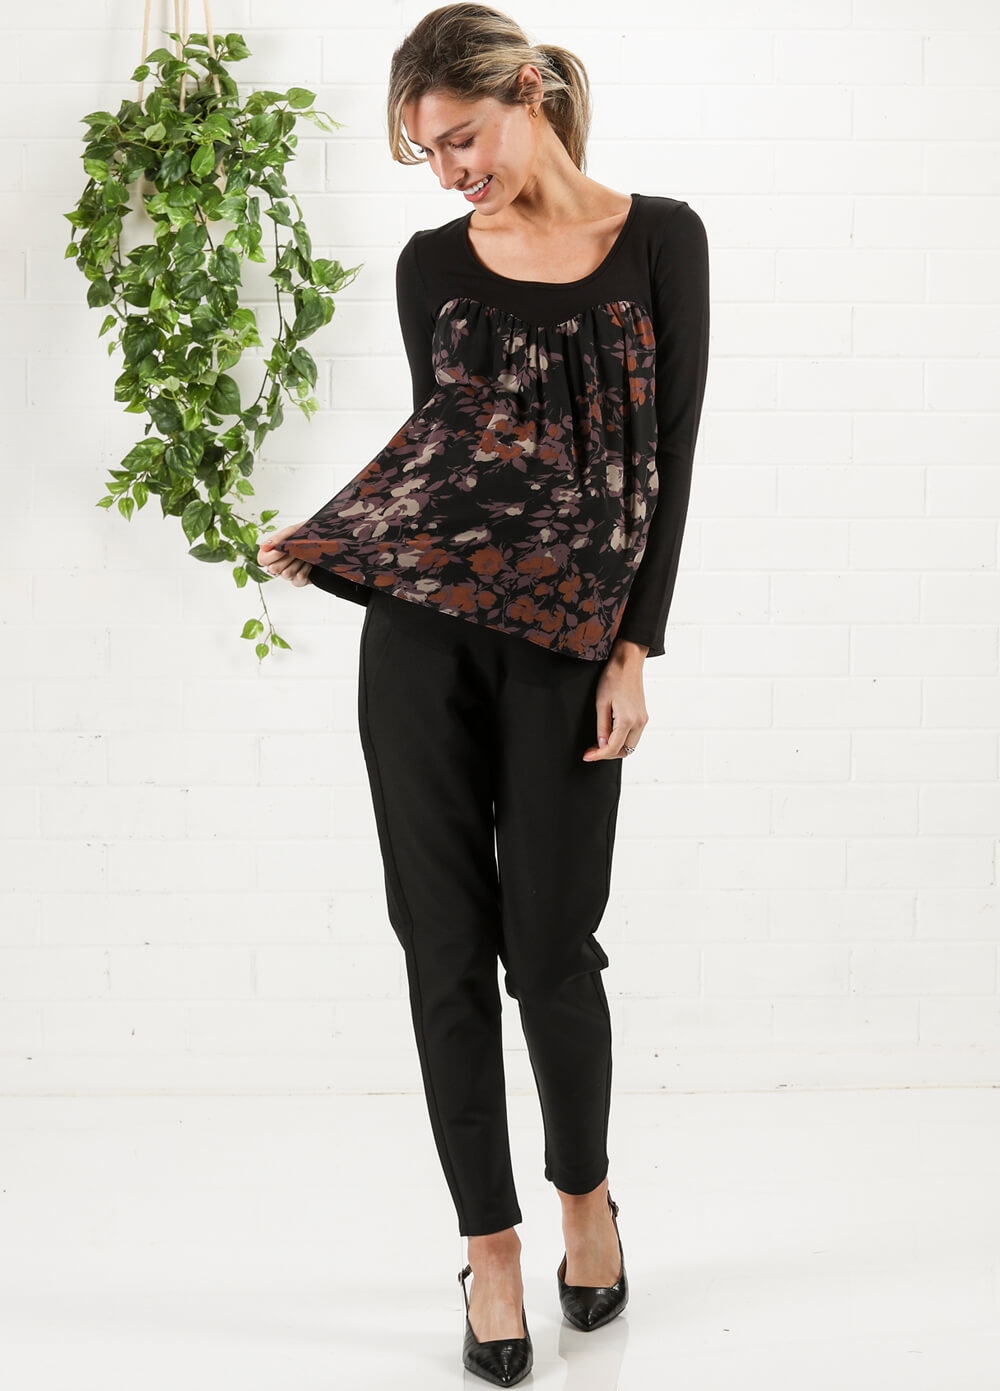 Black/Lilac Floral Chiffon Maternity Top by Maternal America 